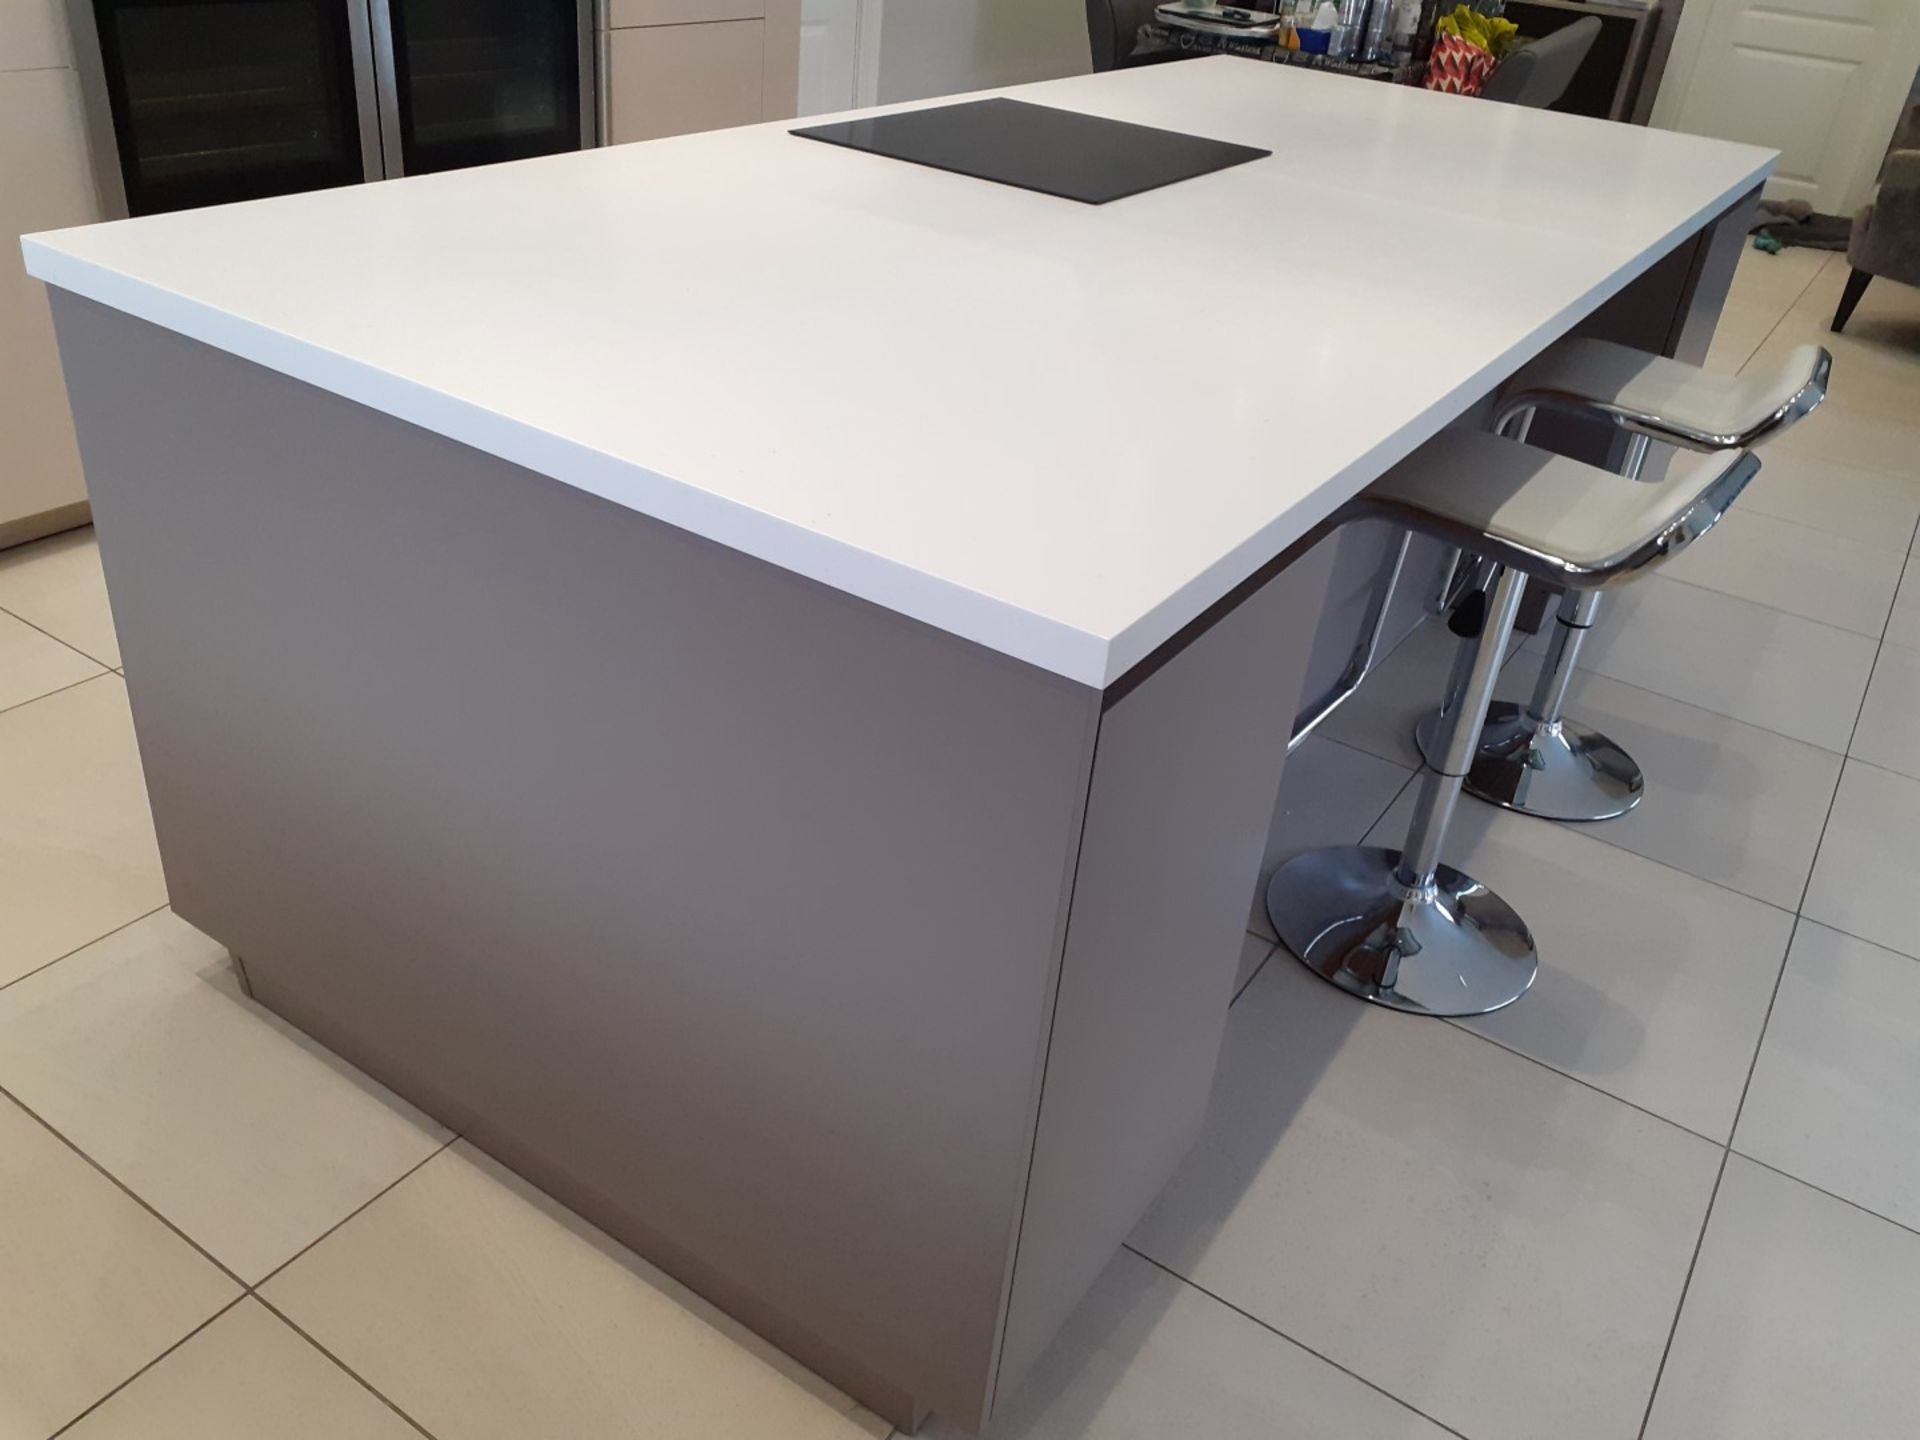 1 x SieMatic Handleless Fitted Kitchen With Intergrated NEFF Appliances, Corian Worktops And Island - Image 14 of 92